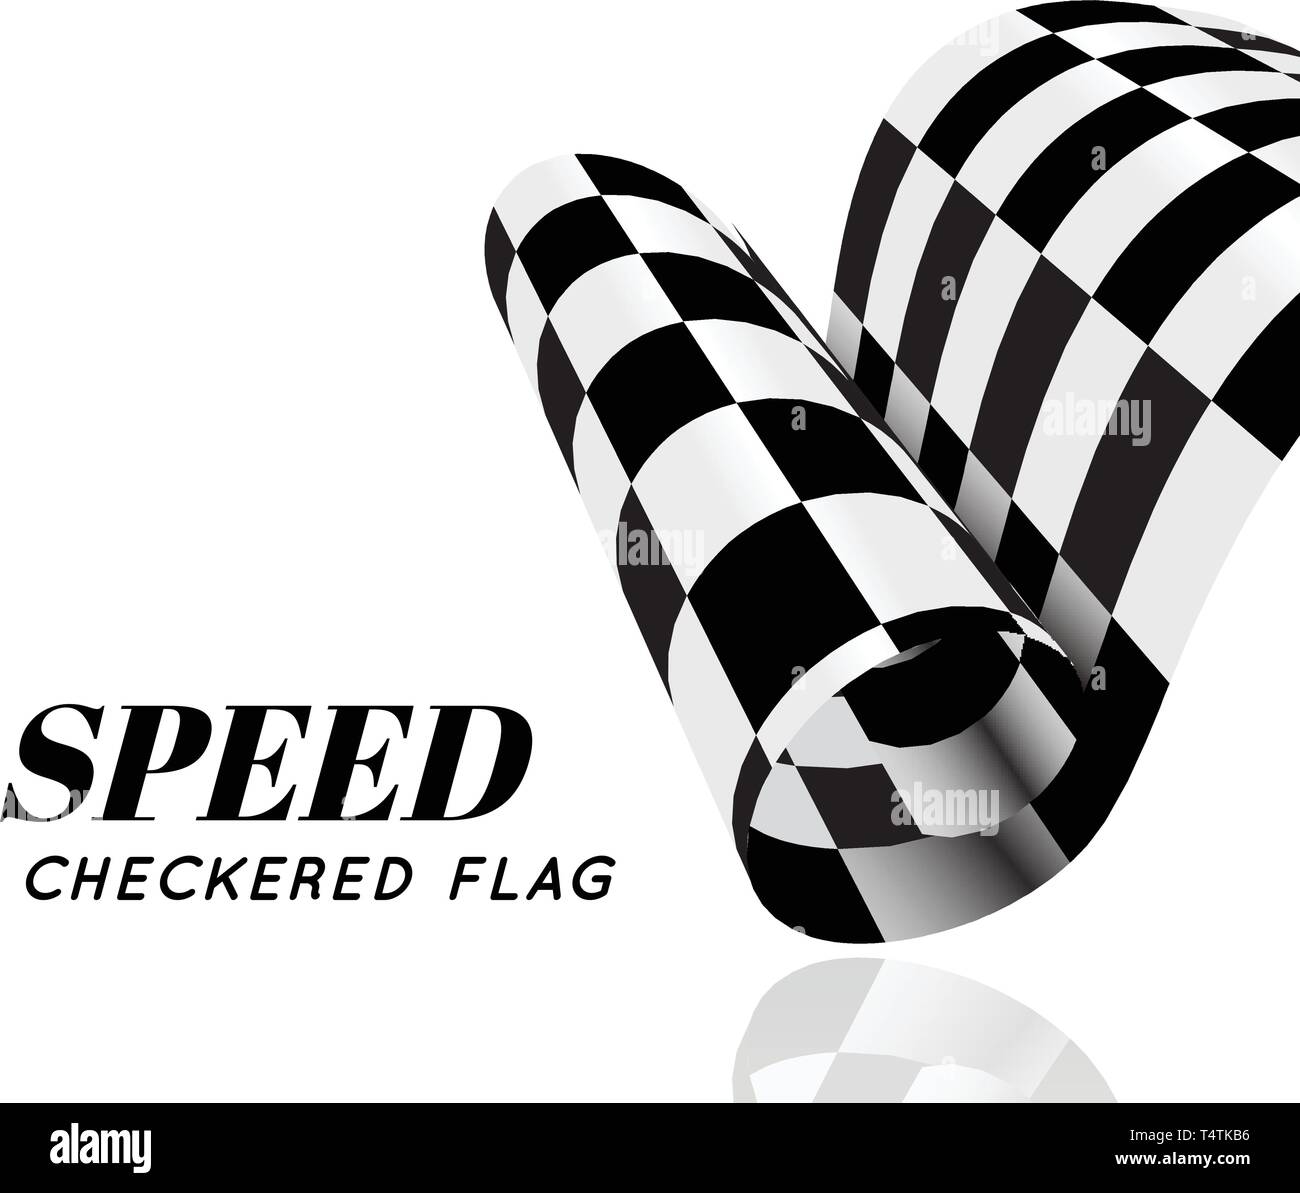 Checkered race flag vector illustration isolated on white Stock Vector